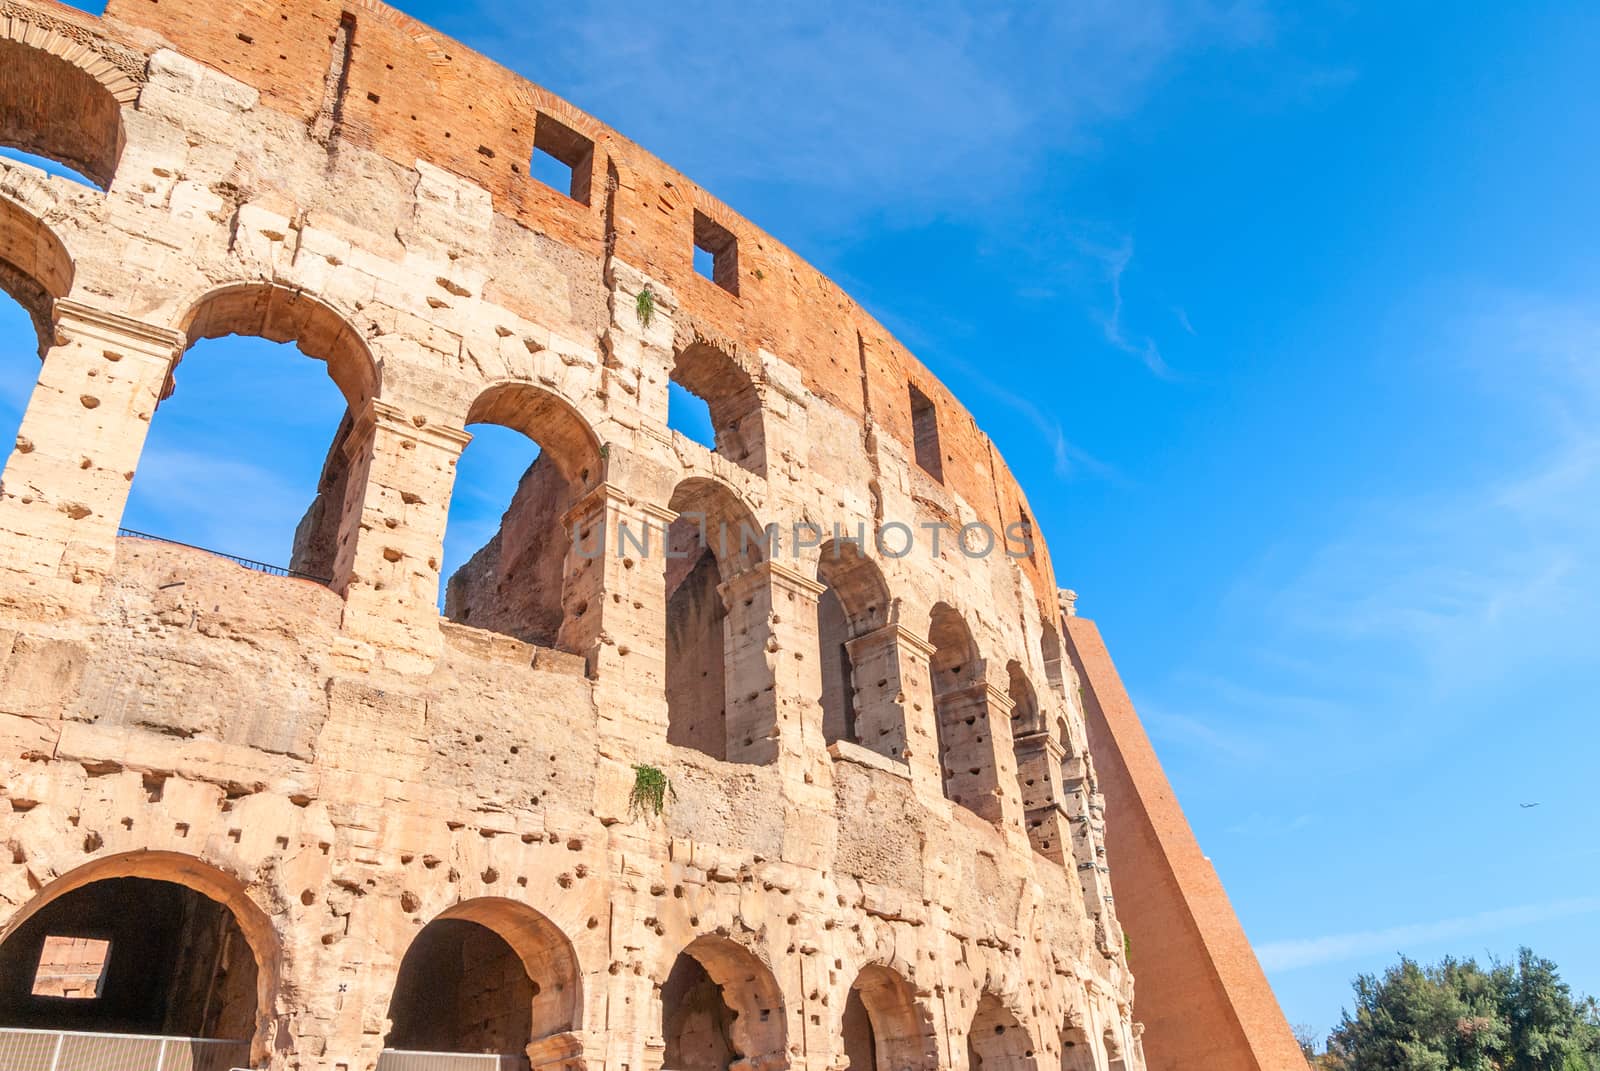 Colosseum in Rome, Italy. Ancient Roman Colosseum is one of the main tourist attractions in Europe. People visit the famous Colosseum in Roma center. Scenic nice view of Colosseum ruins in summer.